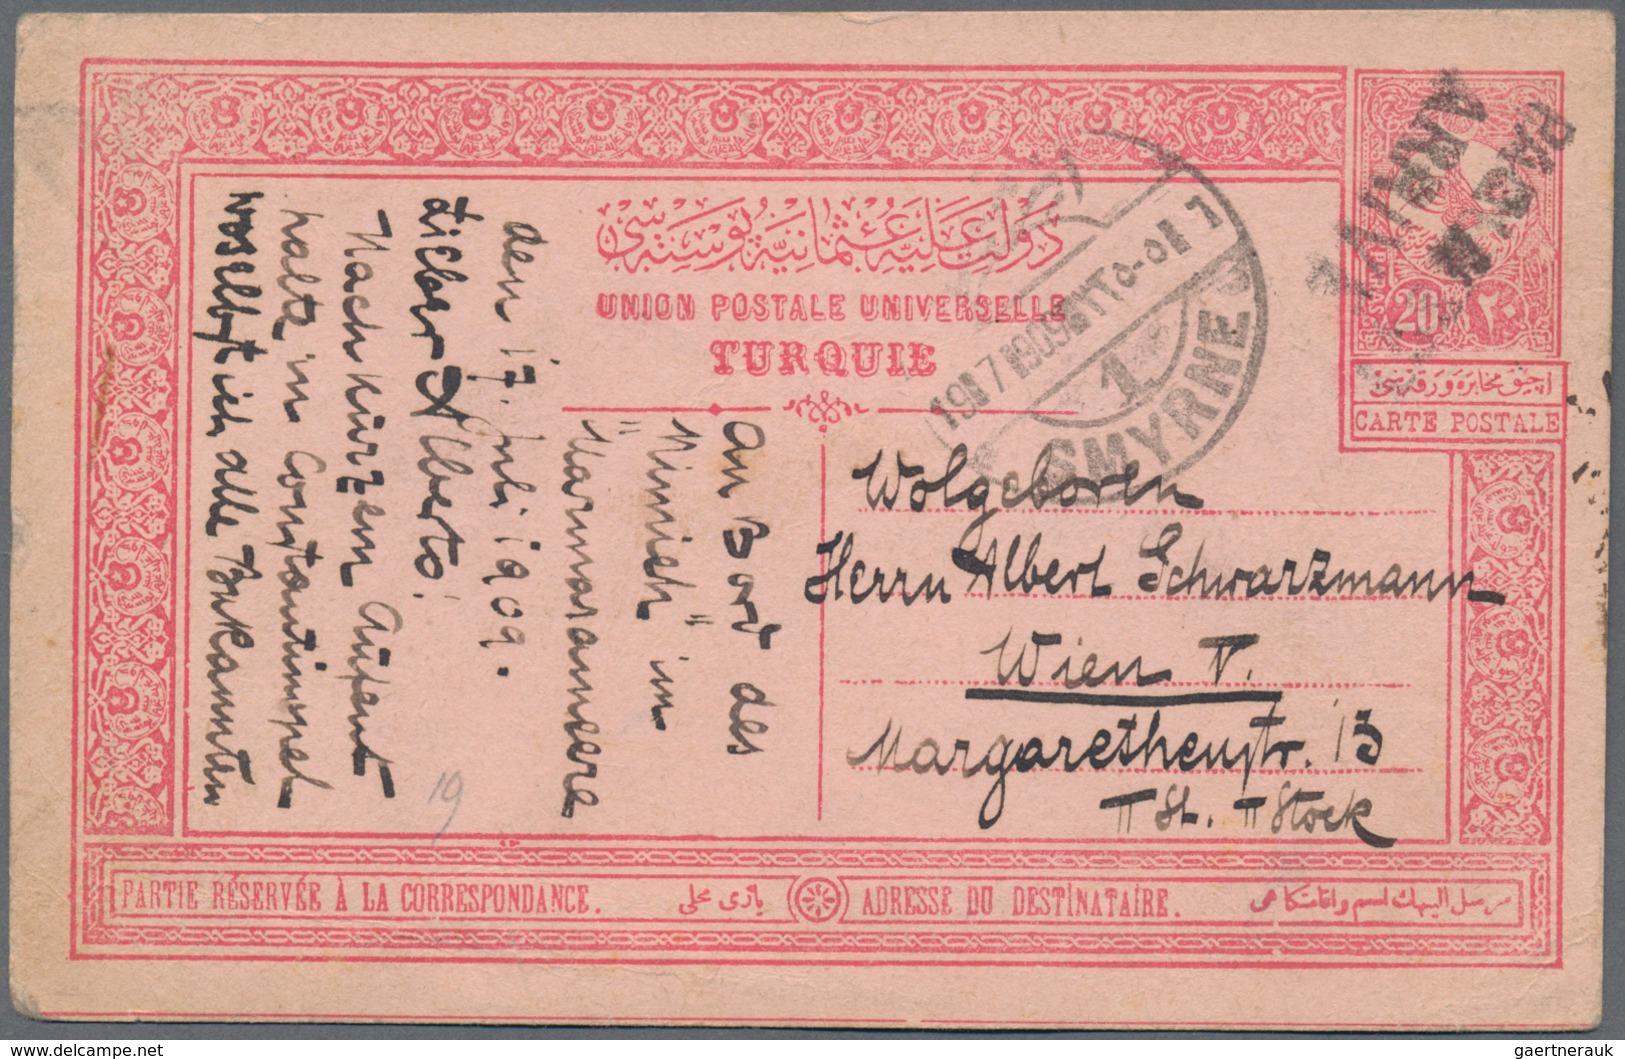 Türkei: 1940/1943, interesting lot of about 40 cards and envelopes with ship markings. Most of them